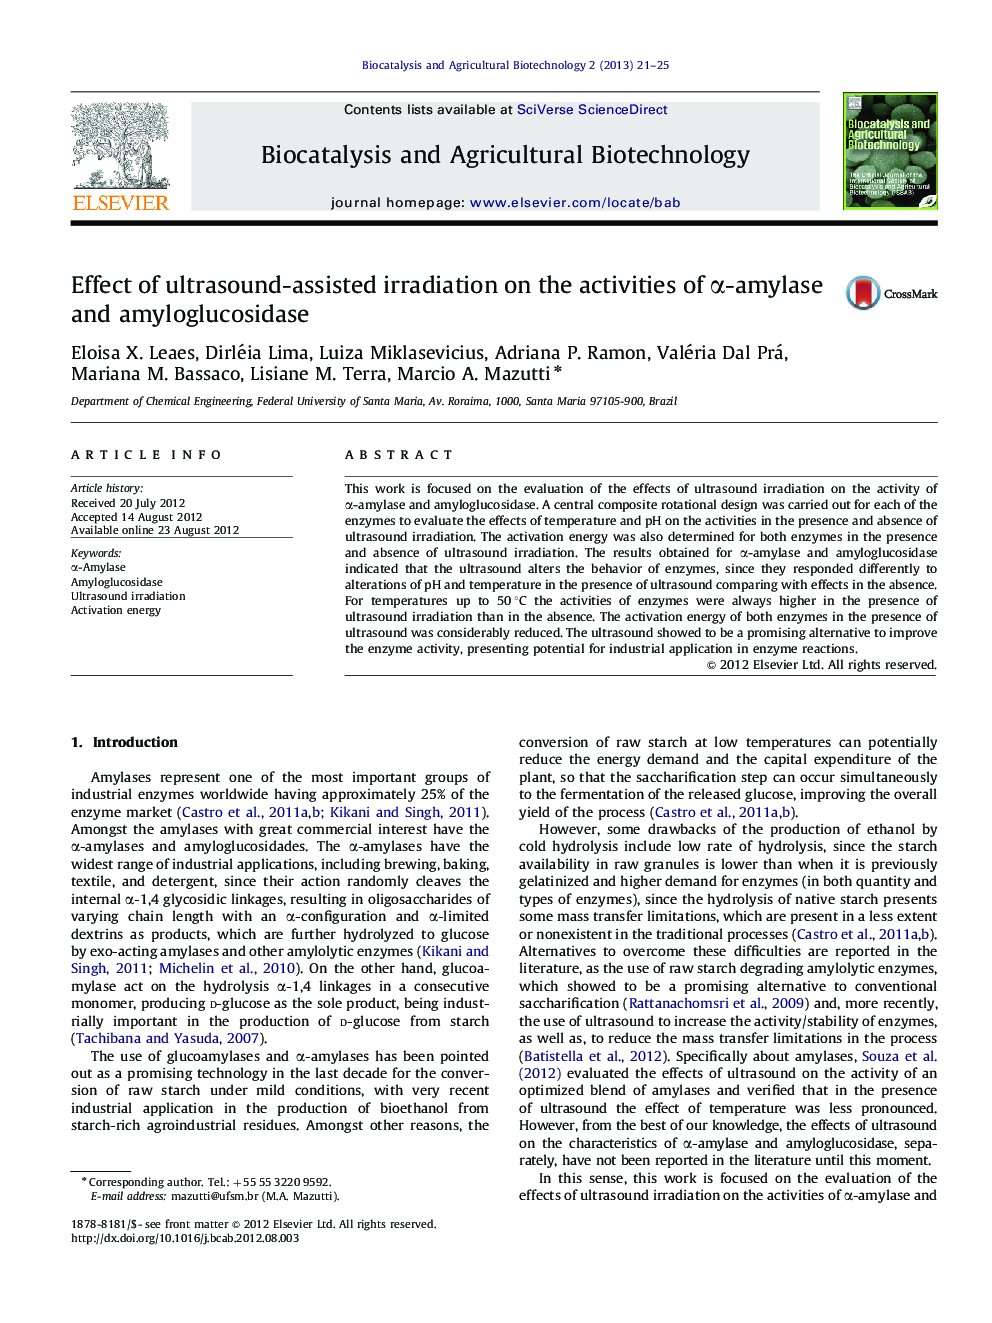 Effect of ultrasound-assisted irradiation on the activities of α-amylase and amyloglucosidase